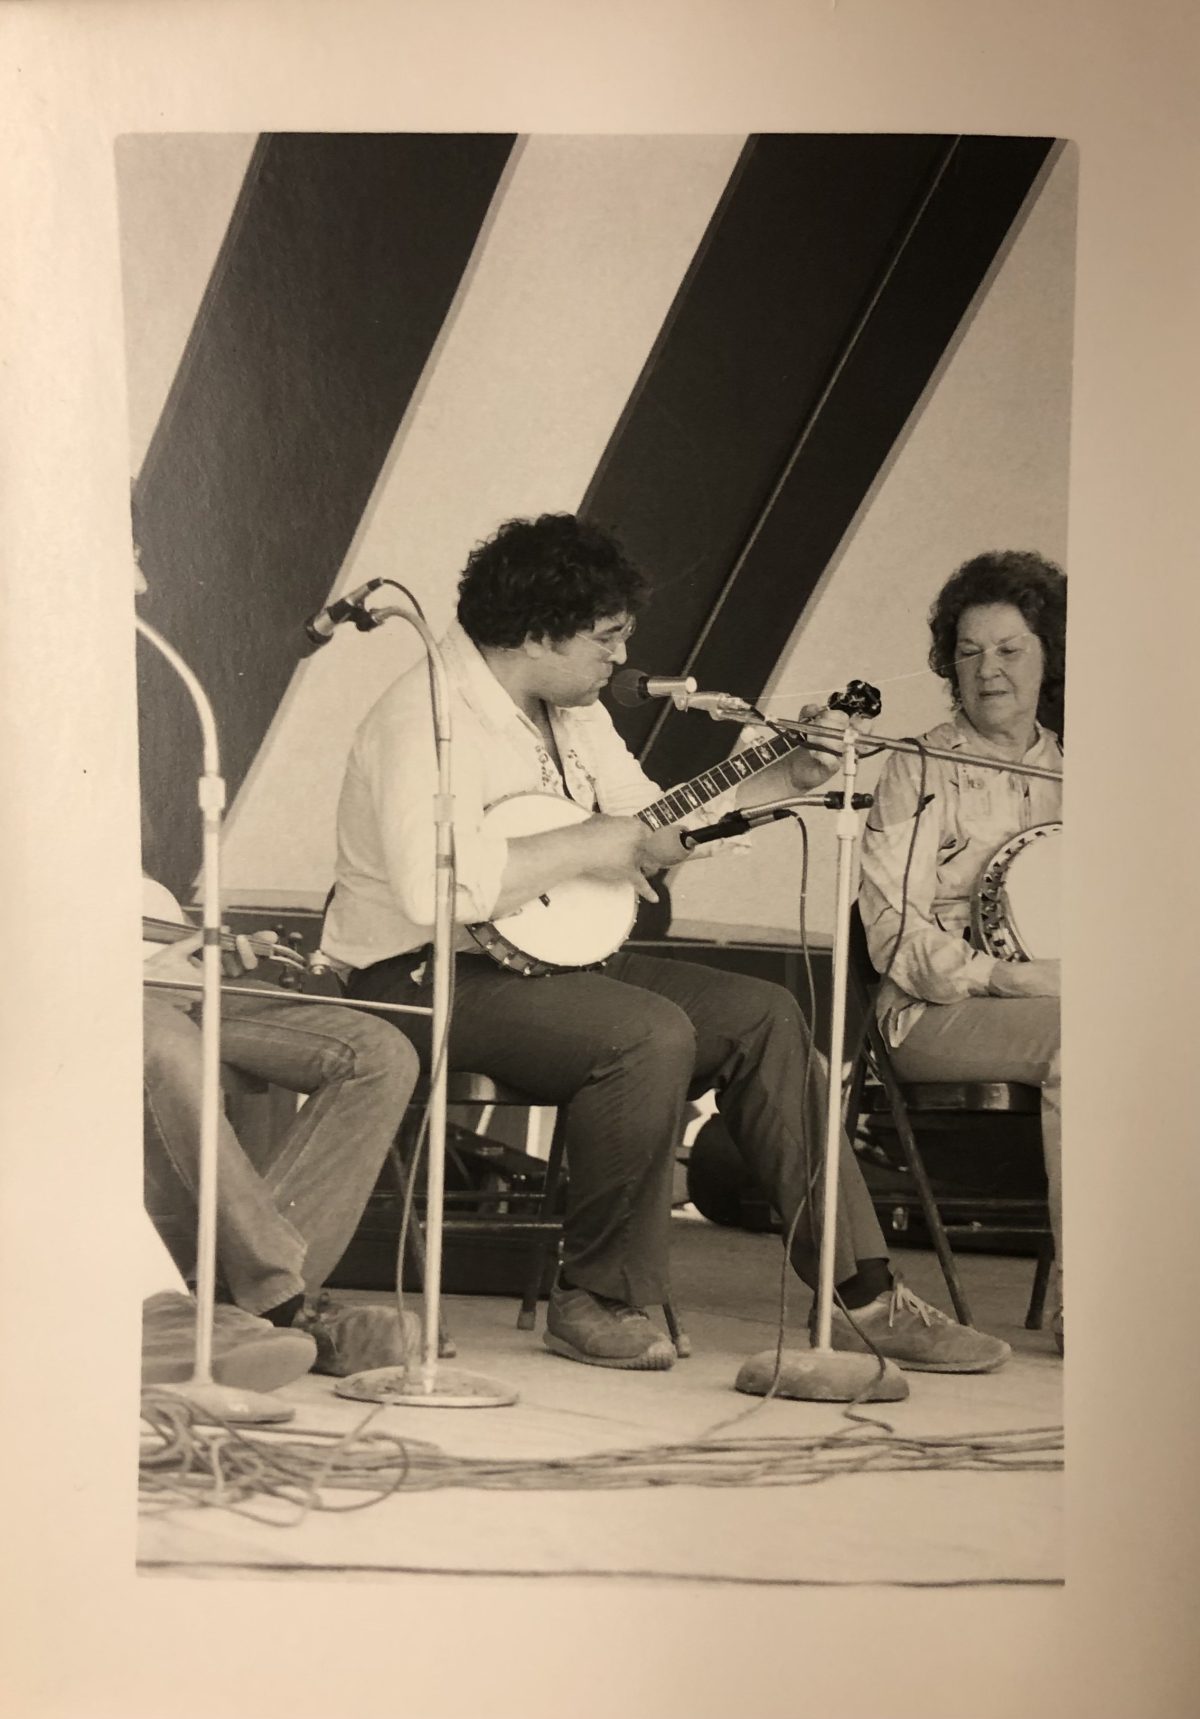 Ray Alden playing banjo, sitting next to Lily May Ledford